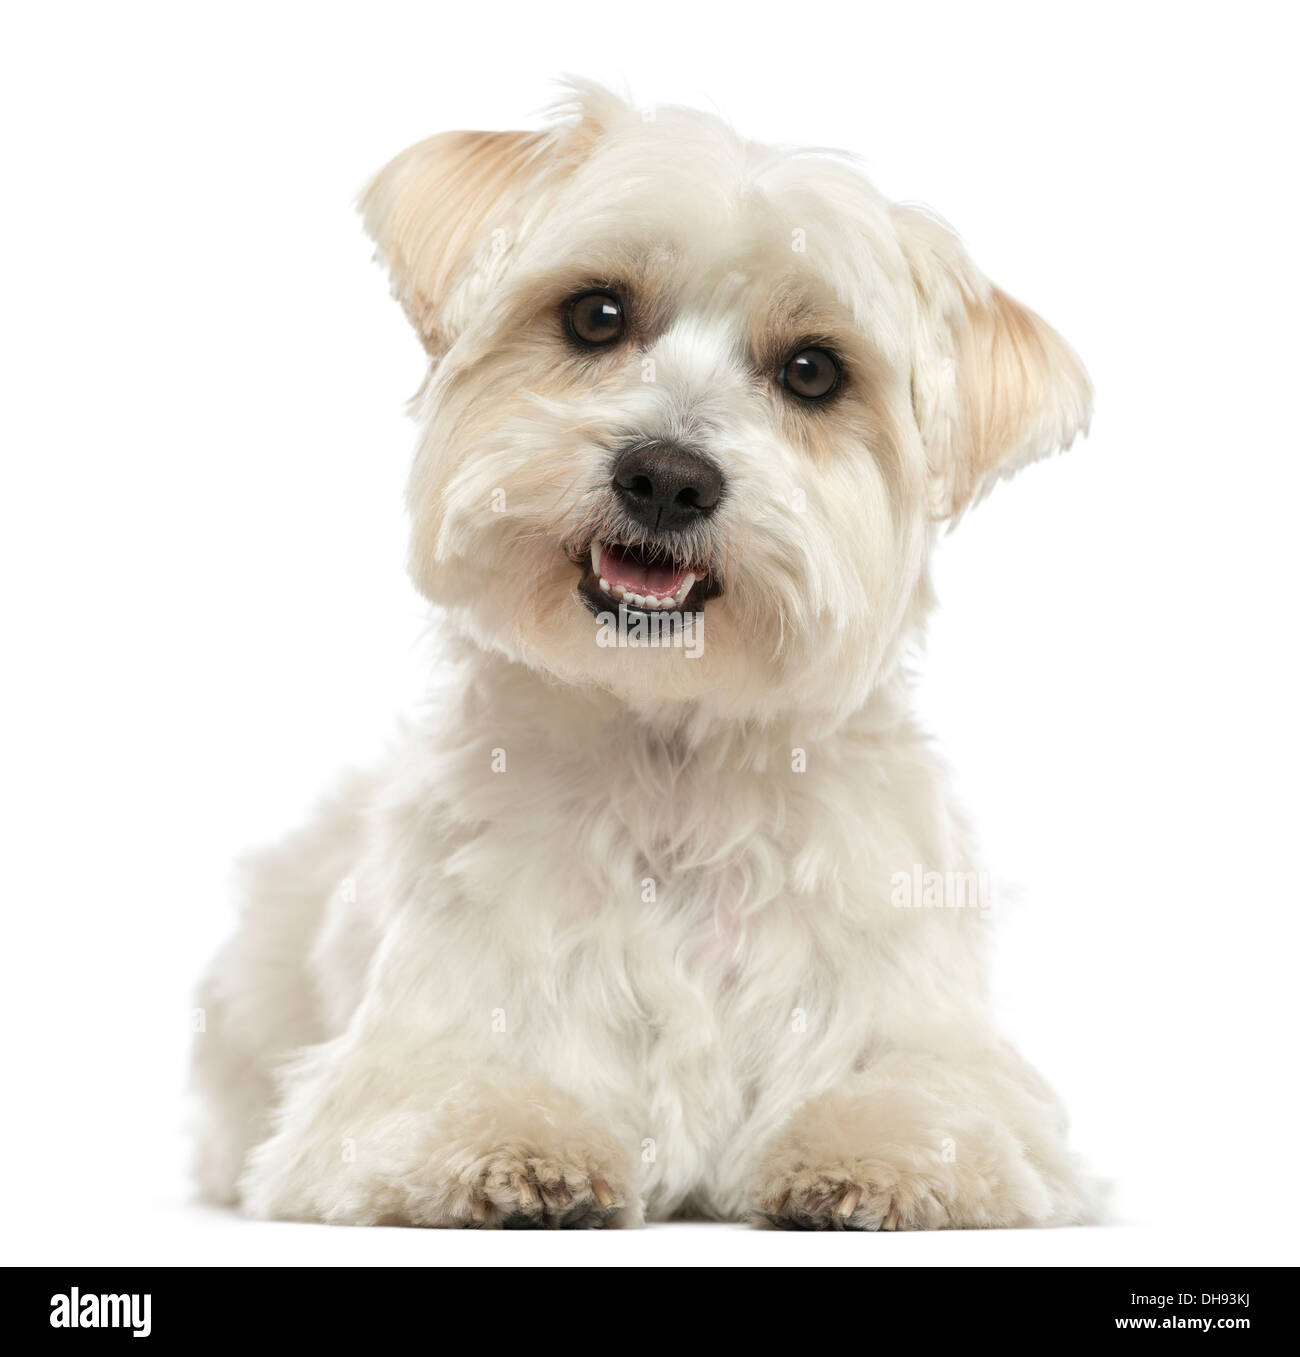 Maltese, lying down, panting, looking at the camera against white background Stock Photo